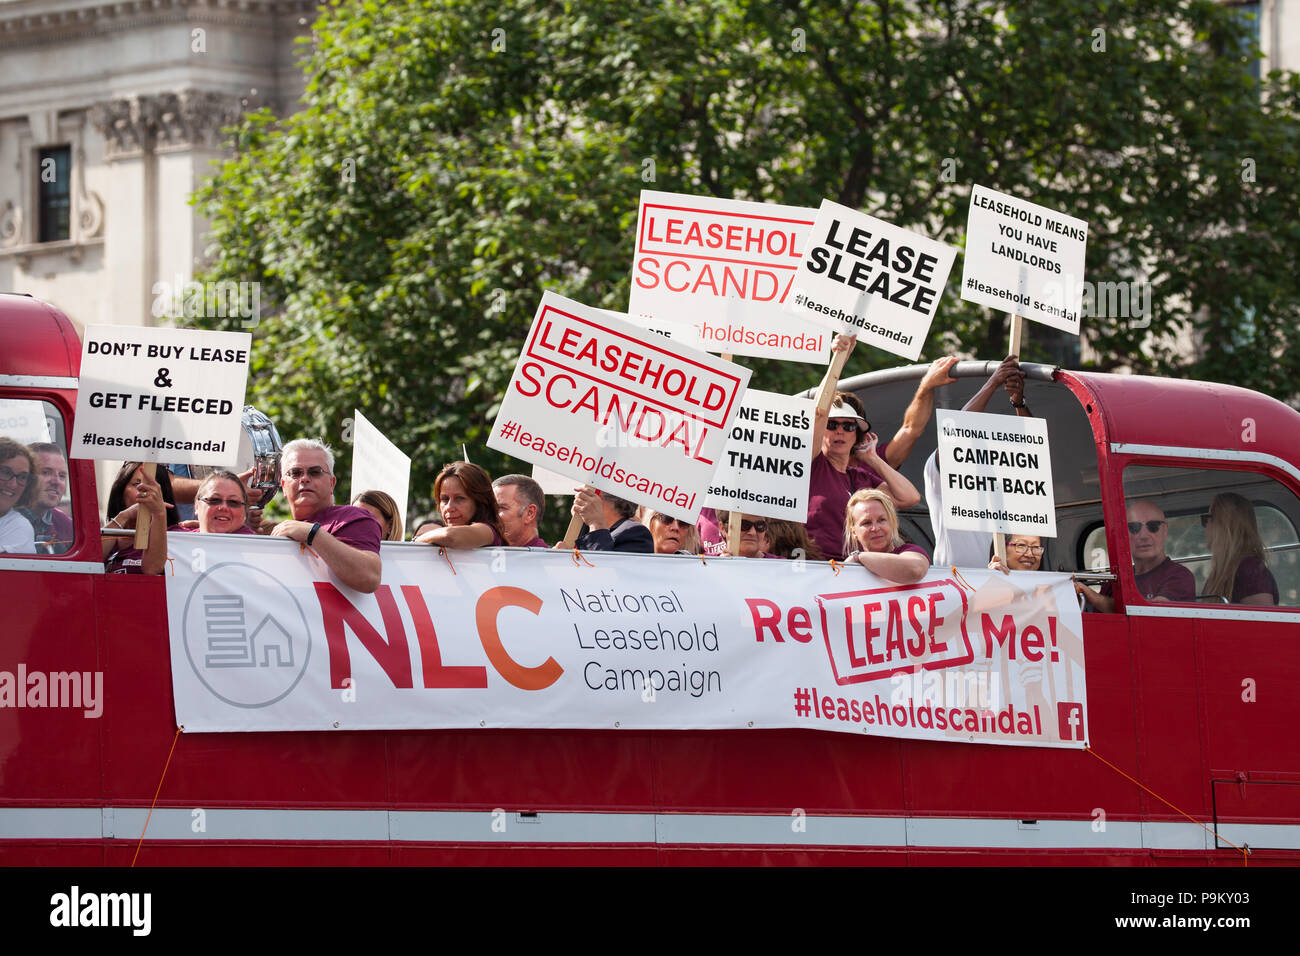 London, UK. 18th July, 2018. Activists from the National Leasehold Campaign protest in Westminster against the leasehold system of property rights, calling for leasehold to be abolished, for strict regulation of residential managing agents and for a Select Committee inquiry. Credit: Mark Kerrison/Alamy Live News Stock Photo